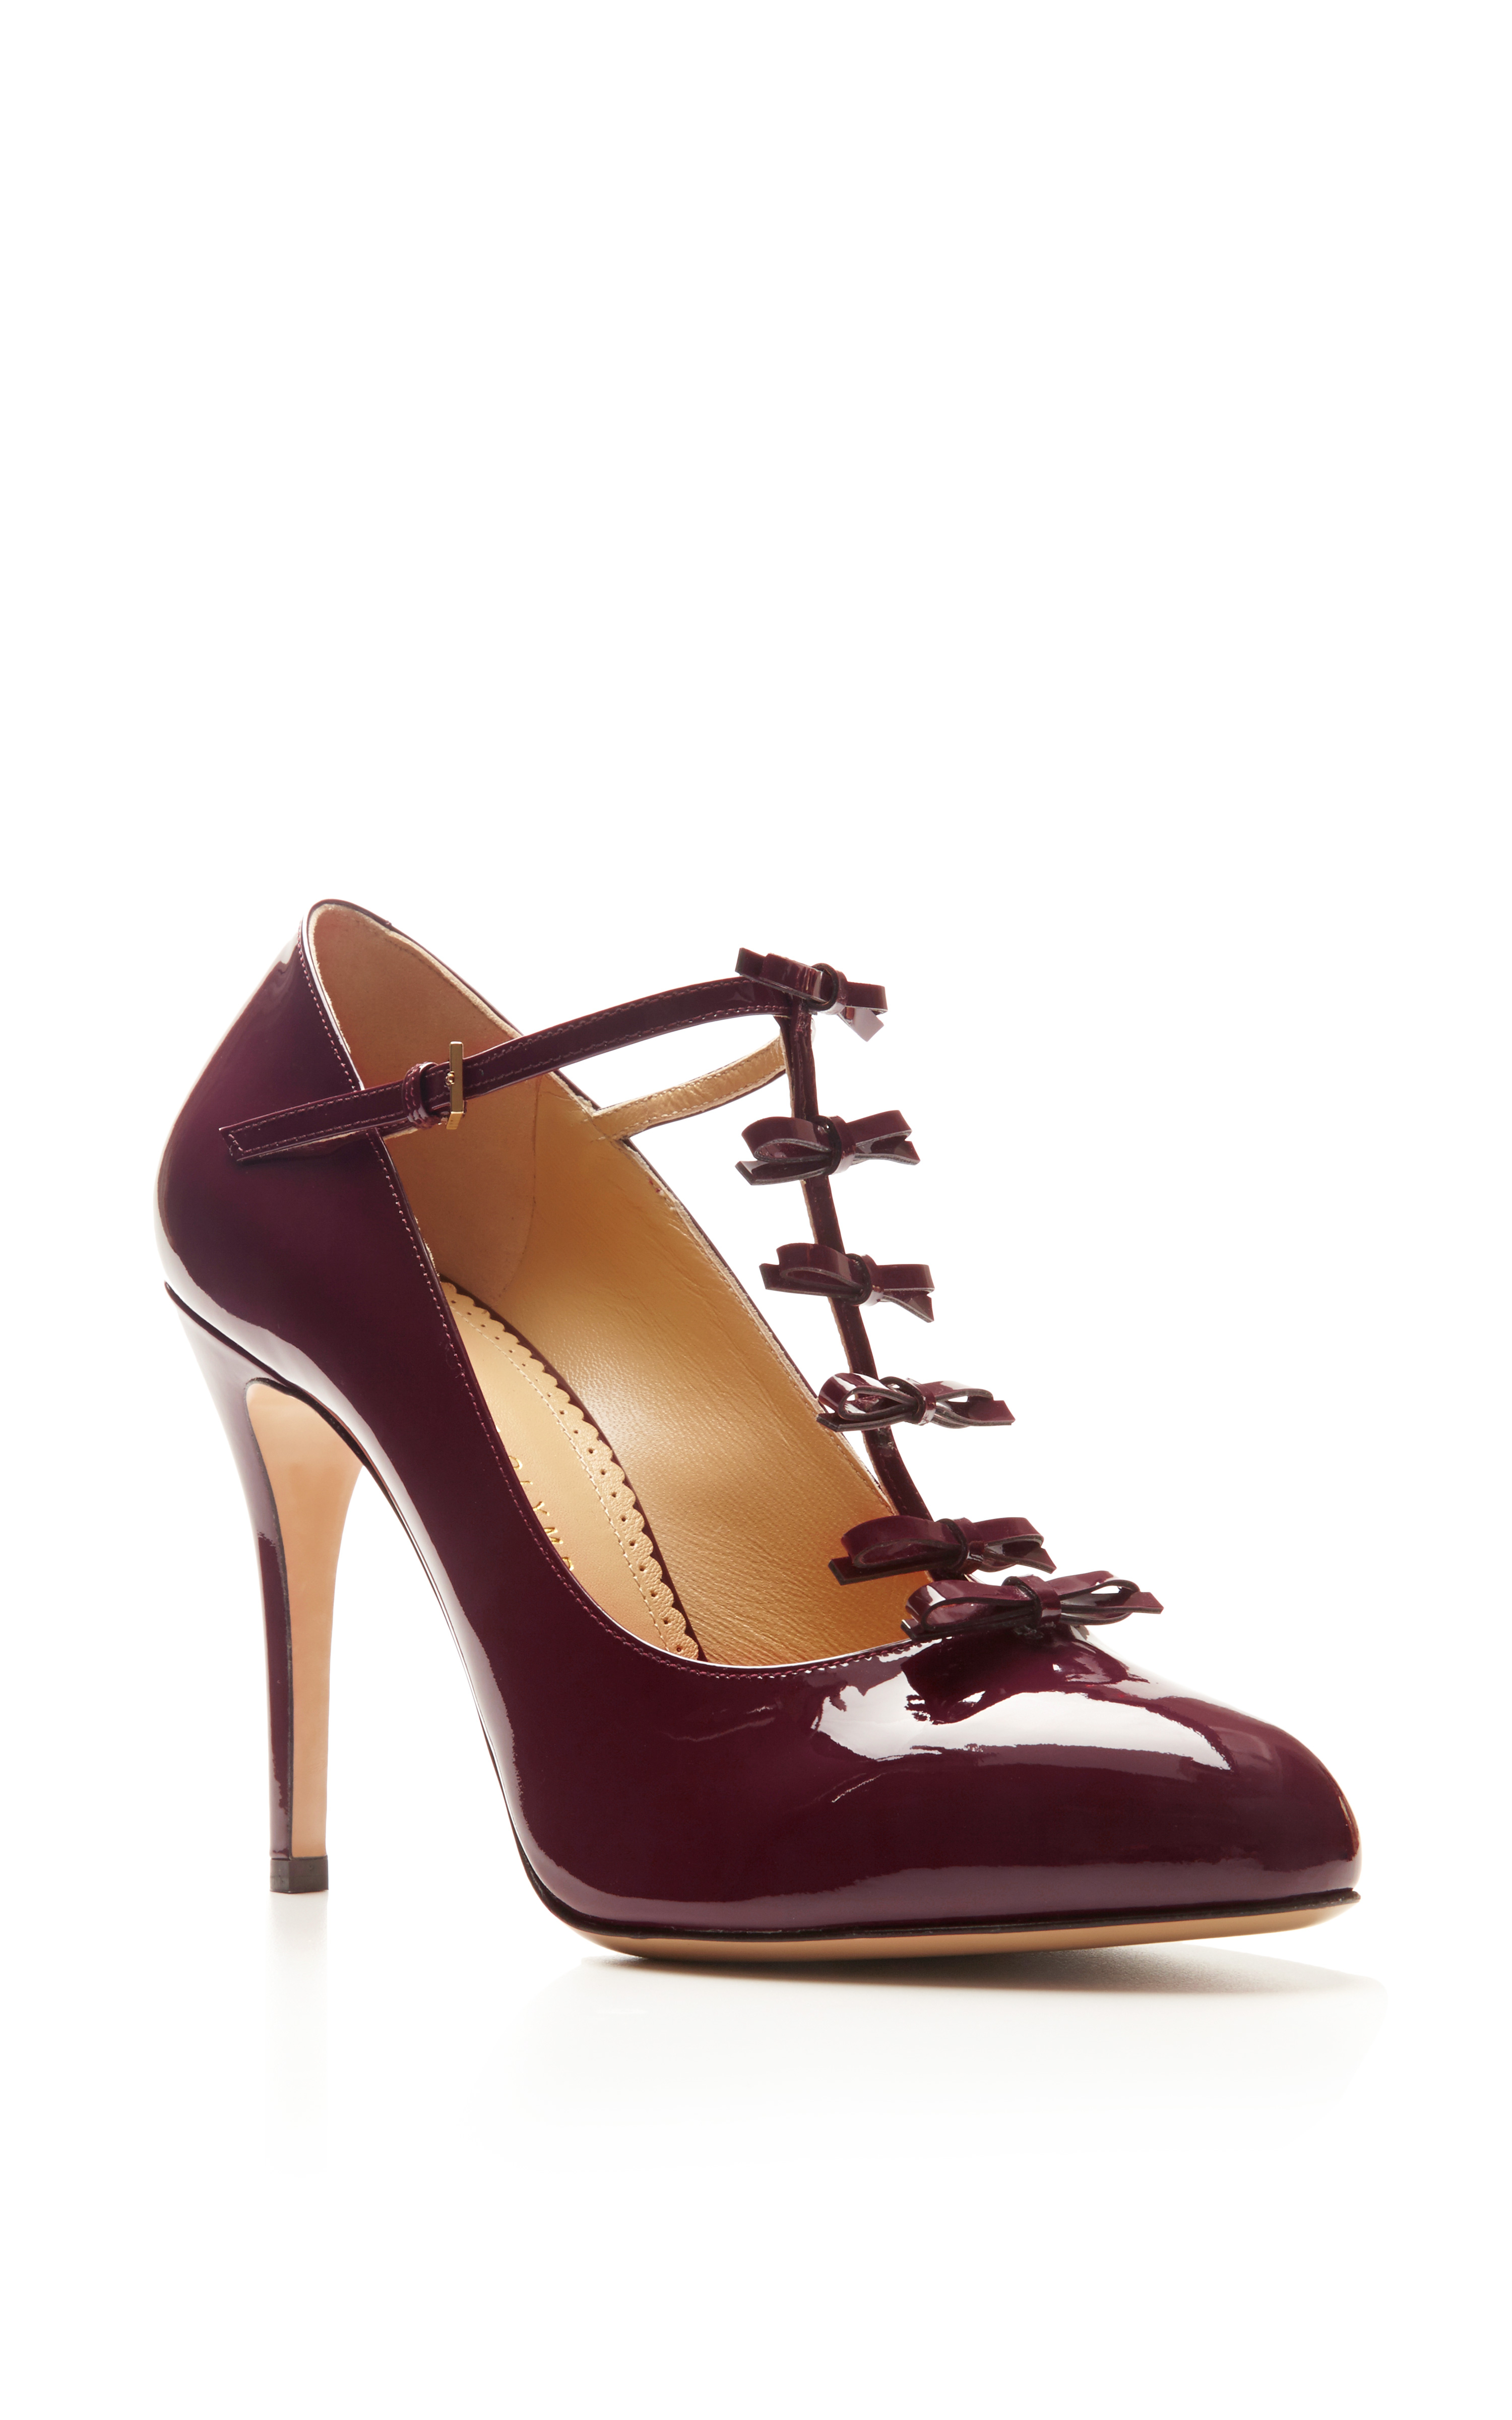 Charlotte olympia Prissy Patent Leather Maryjane Pumps in Purple | Lyst